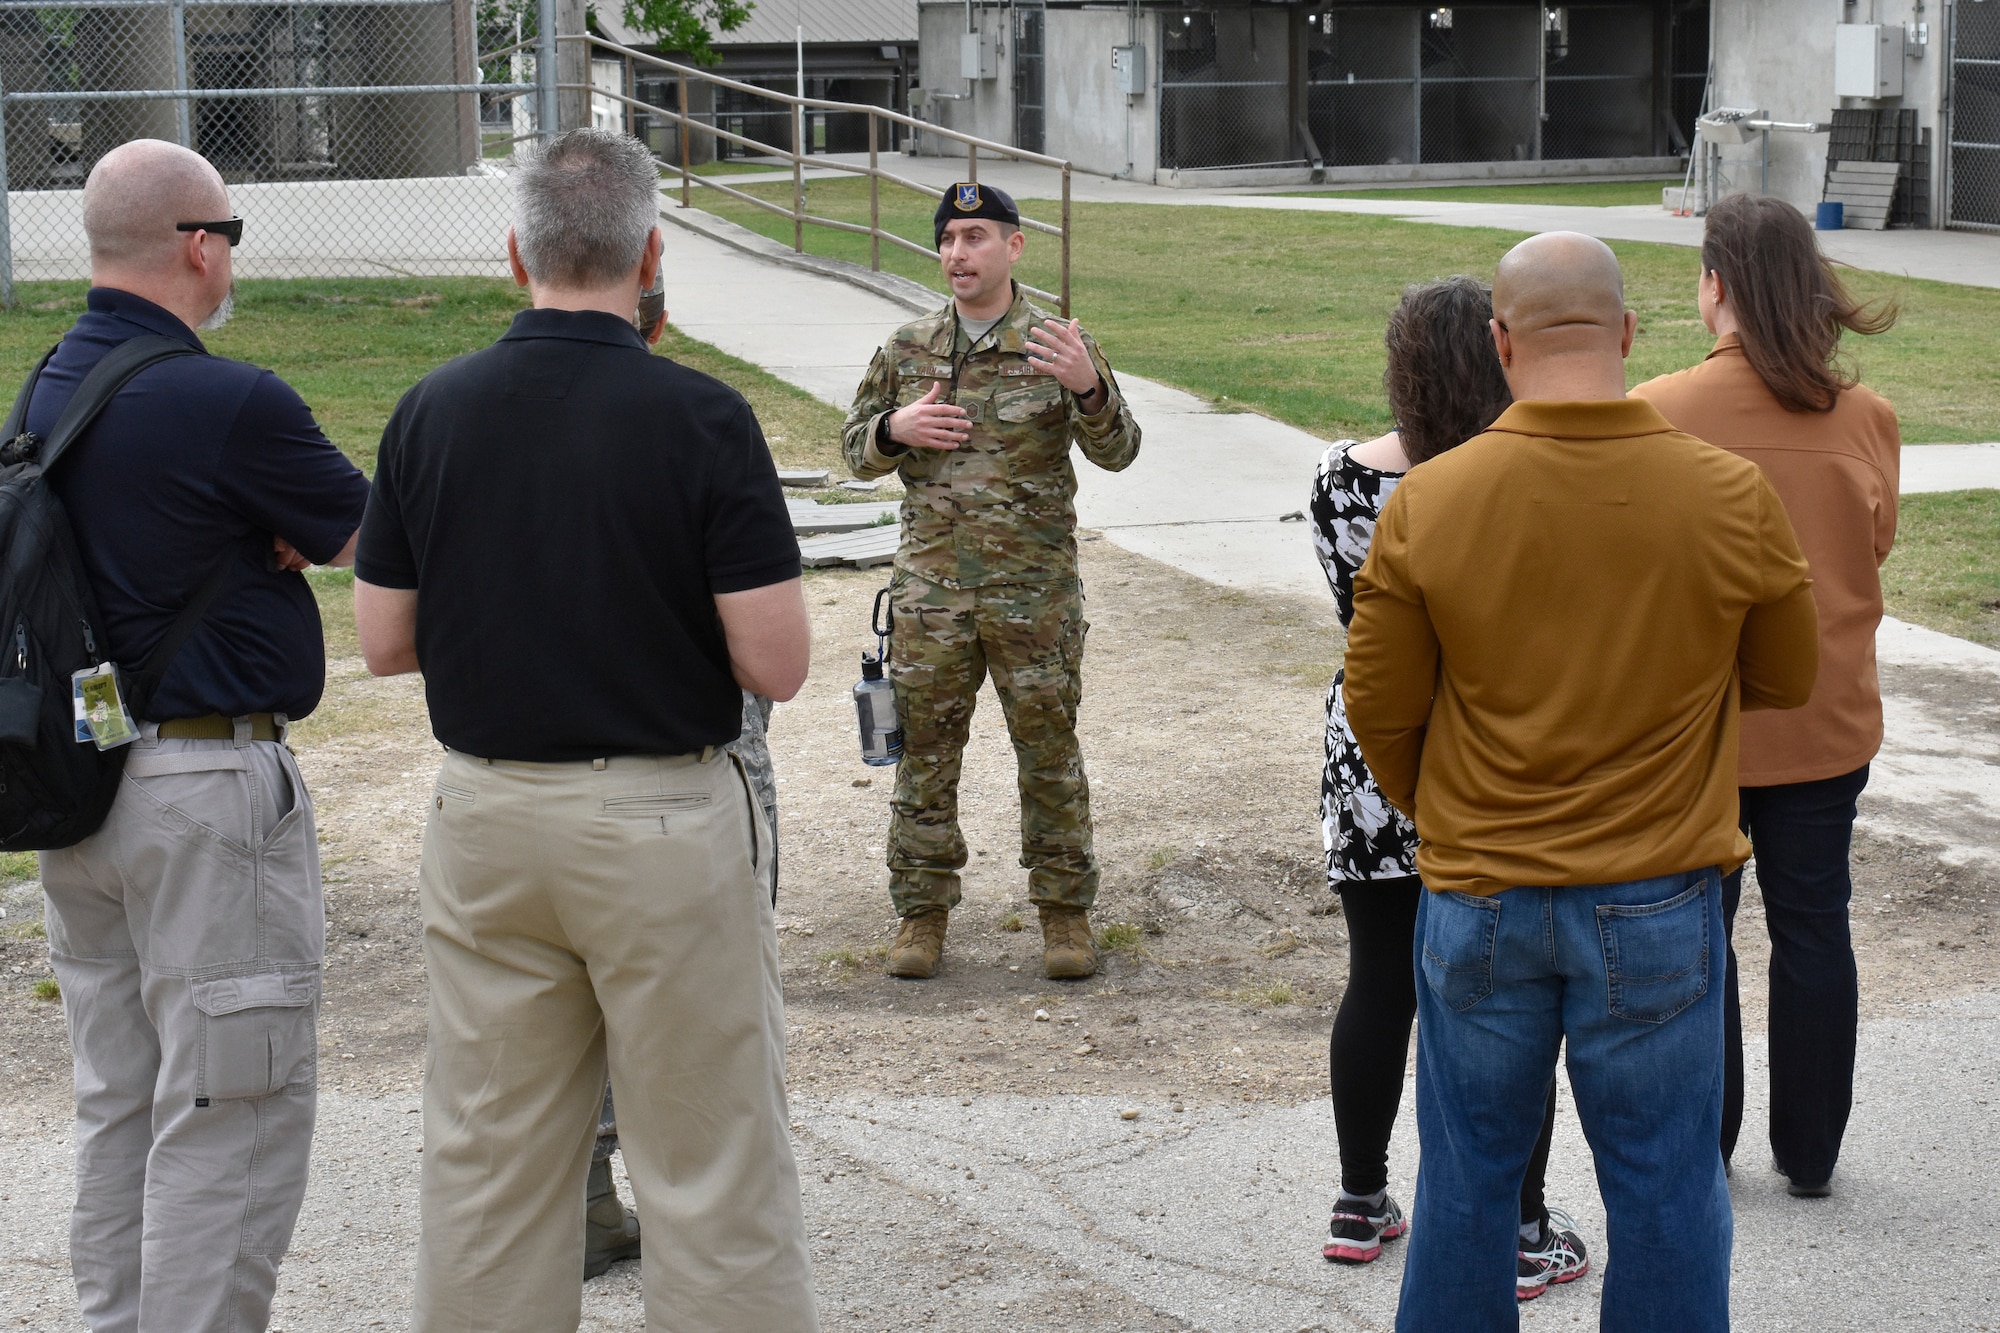 Master Sgt. Steve Kaun, Air Force Military Working Dog Program Manager, gives the government-wide working dog team members a tour of 341st Training Squadron’s military working dog kennels on Joint Base San Antonio-Lackland, Texas, April 16, 2019. The 341st TRS provides training to MWDs used in patrol, drug and explosive detection, and specialized mission functions for the DoD and other government agencies. (U.S. Air Force photo by Shannon Carabajal)